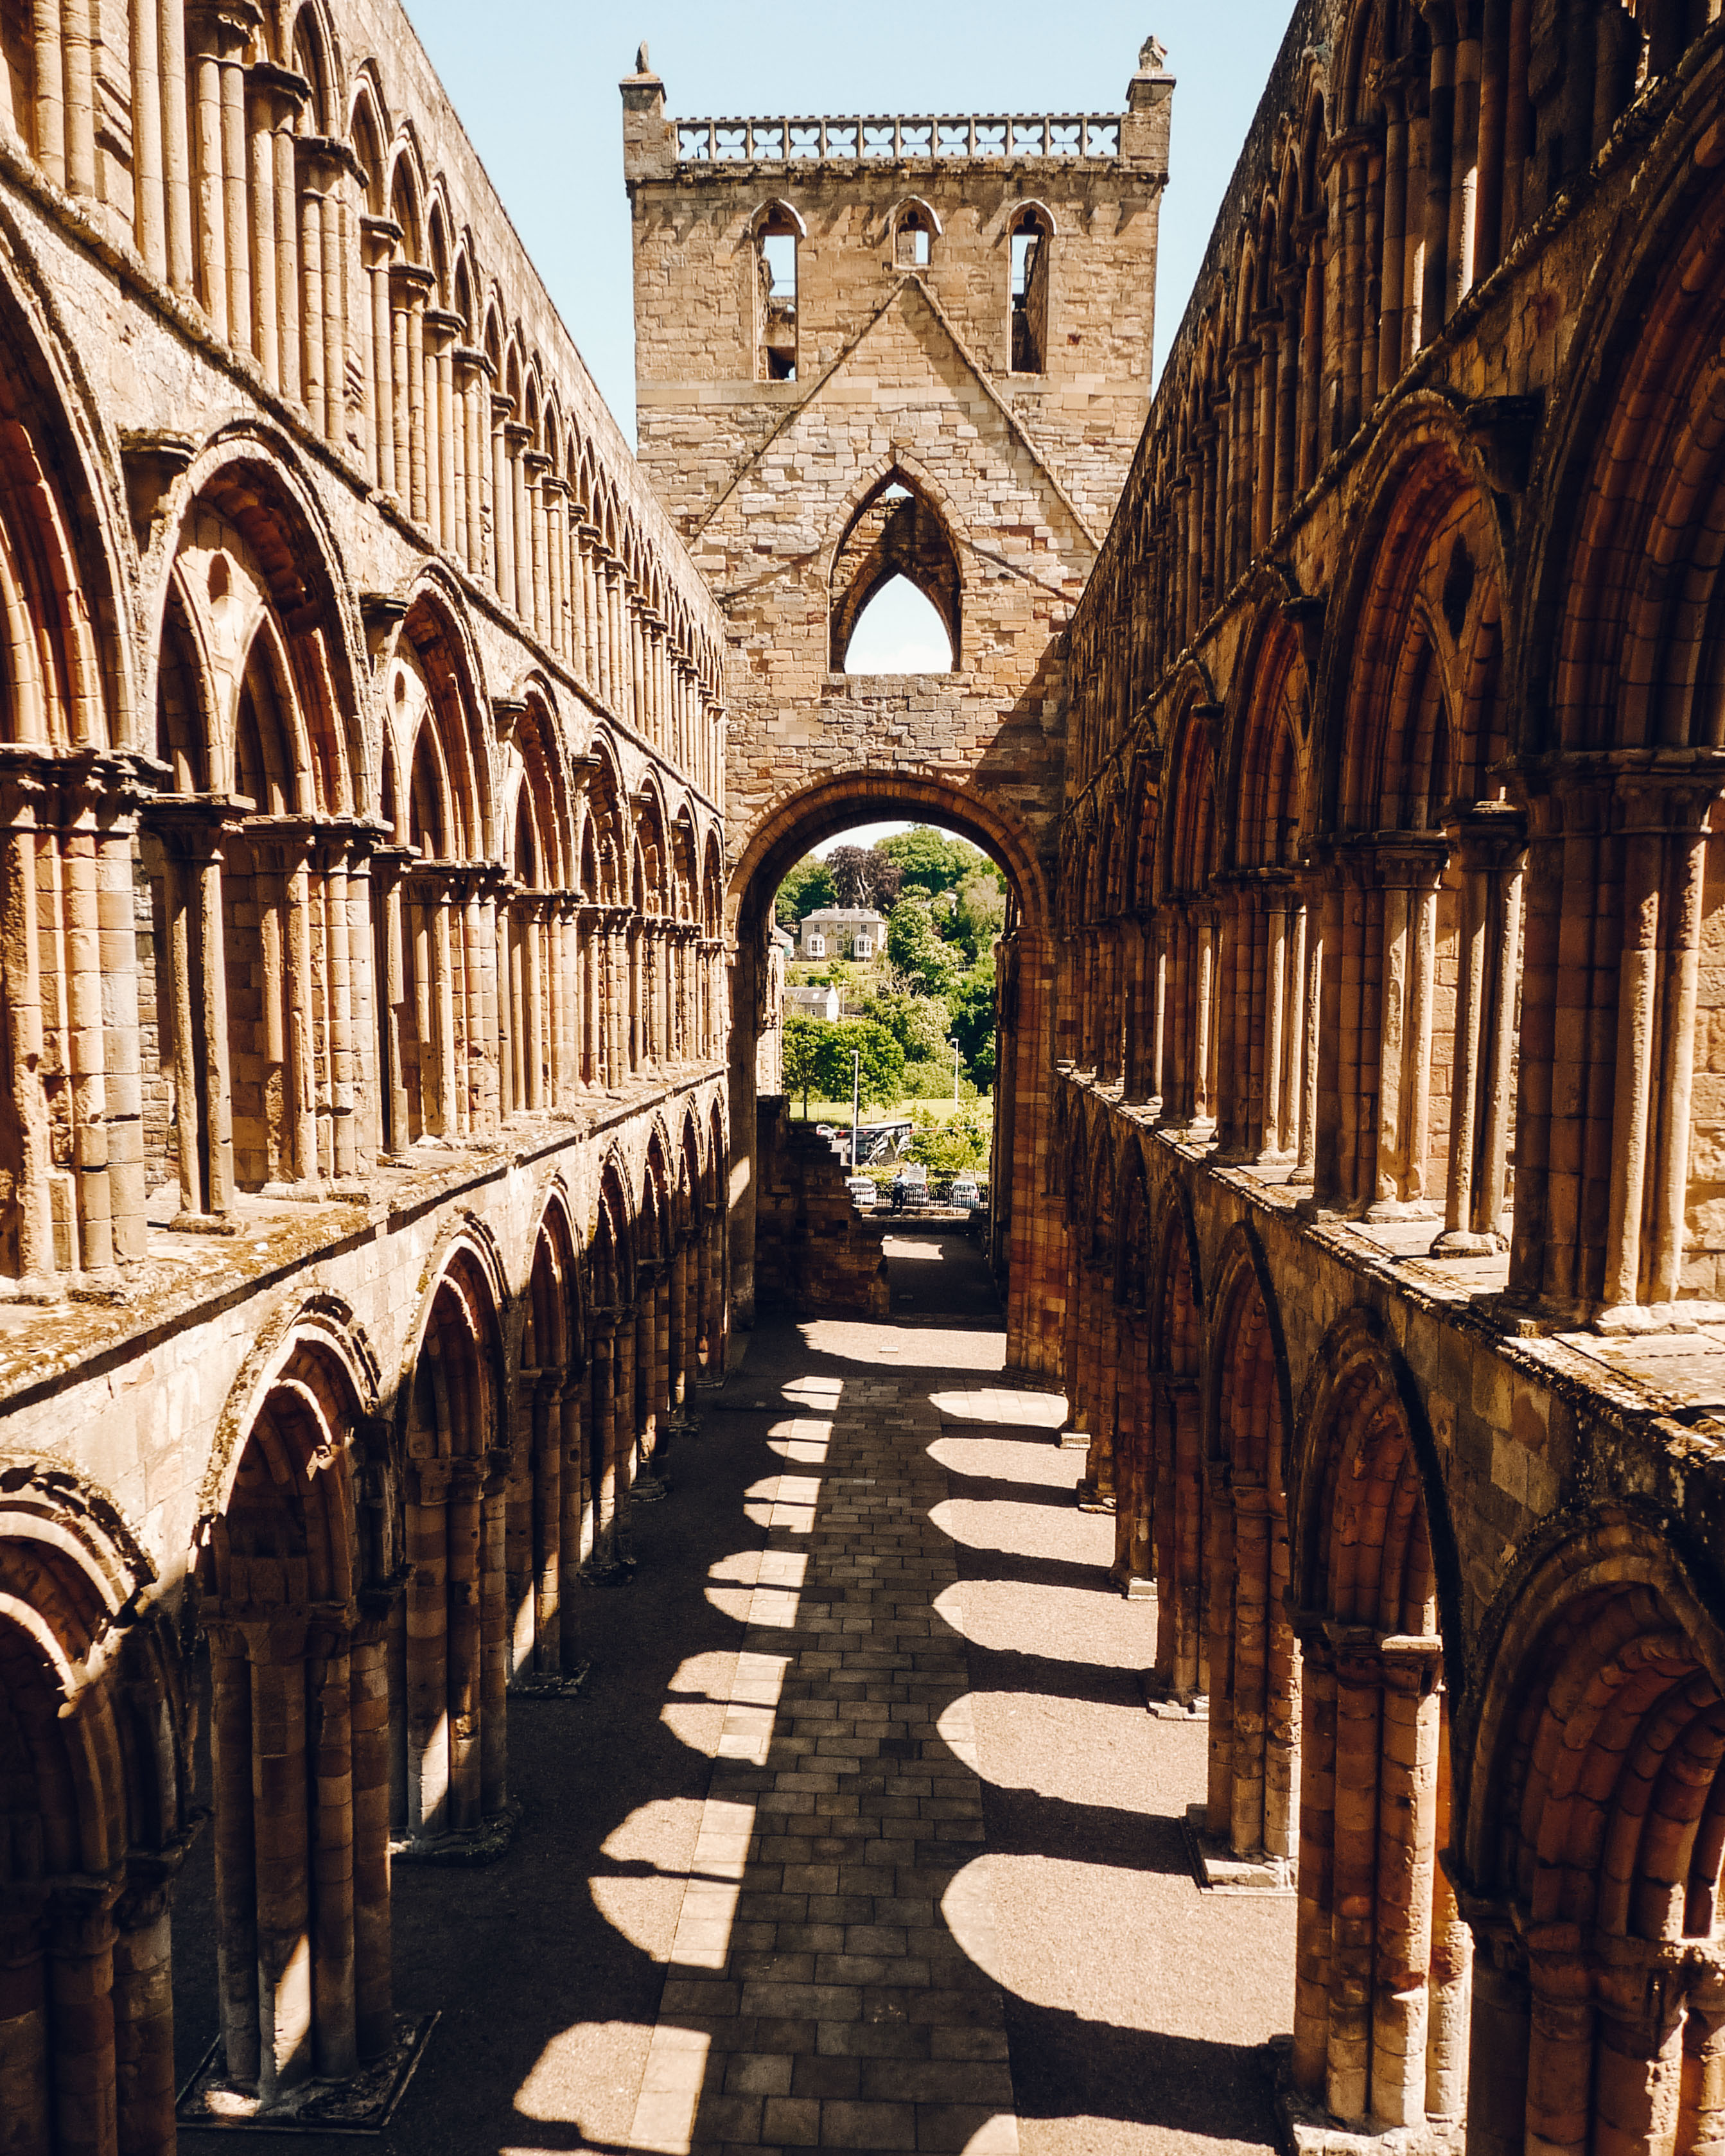 View down the middle of the ruined Jedburgh Abbey with two storey of stone arches and trees beyond